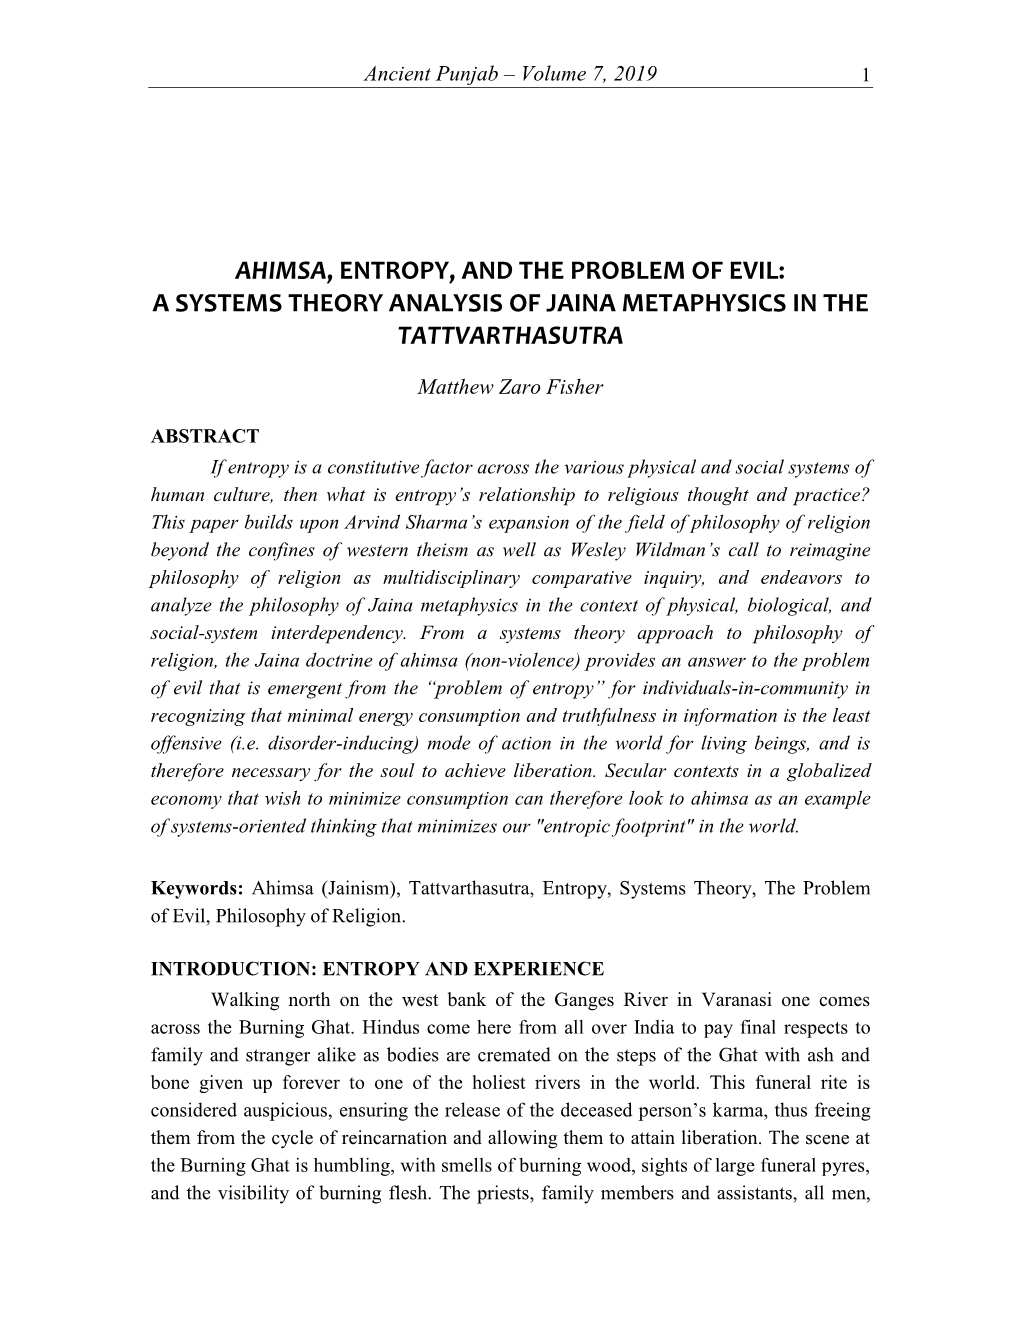 Ahimsa, Entropy, and the Problem of Evil: a Systems Theory Analysis of Jaina Metaphysics in the Tattvarthasutra